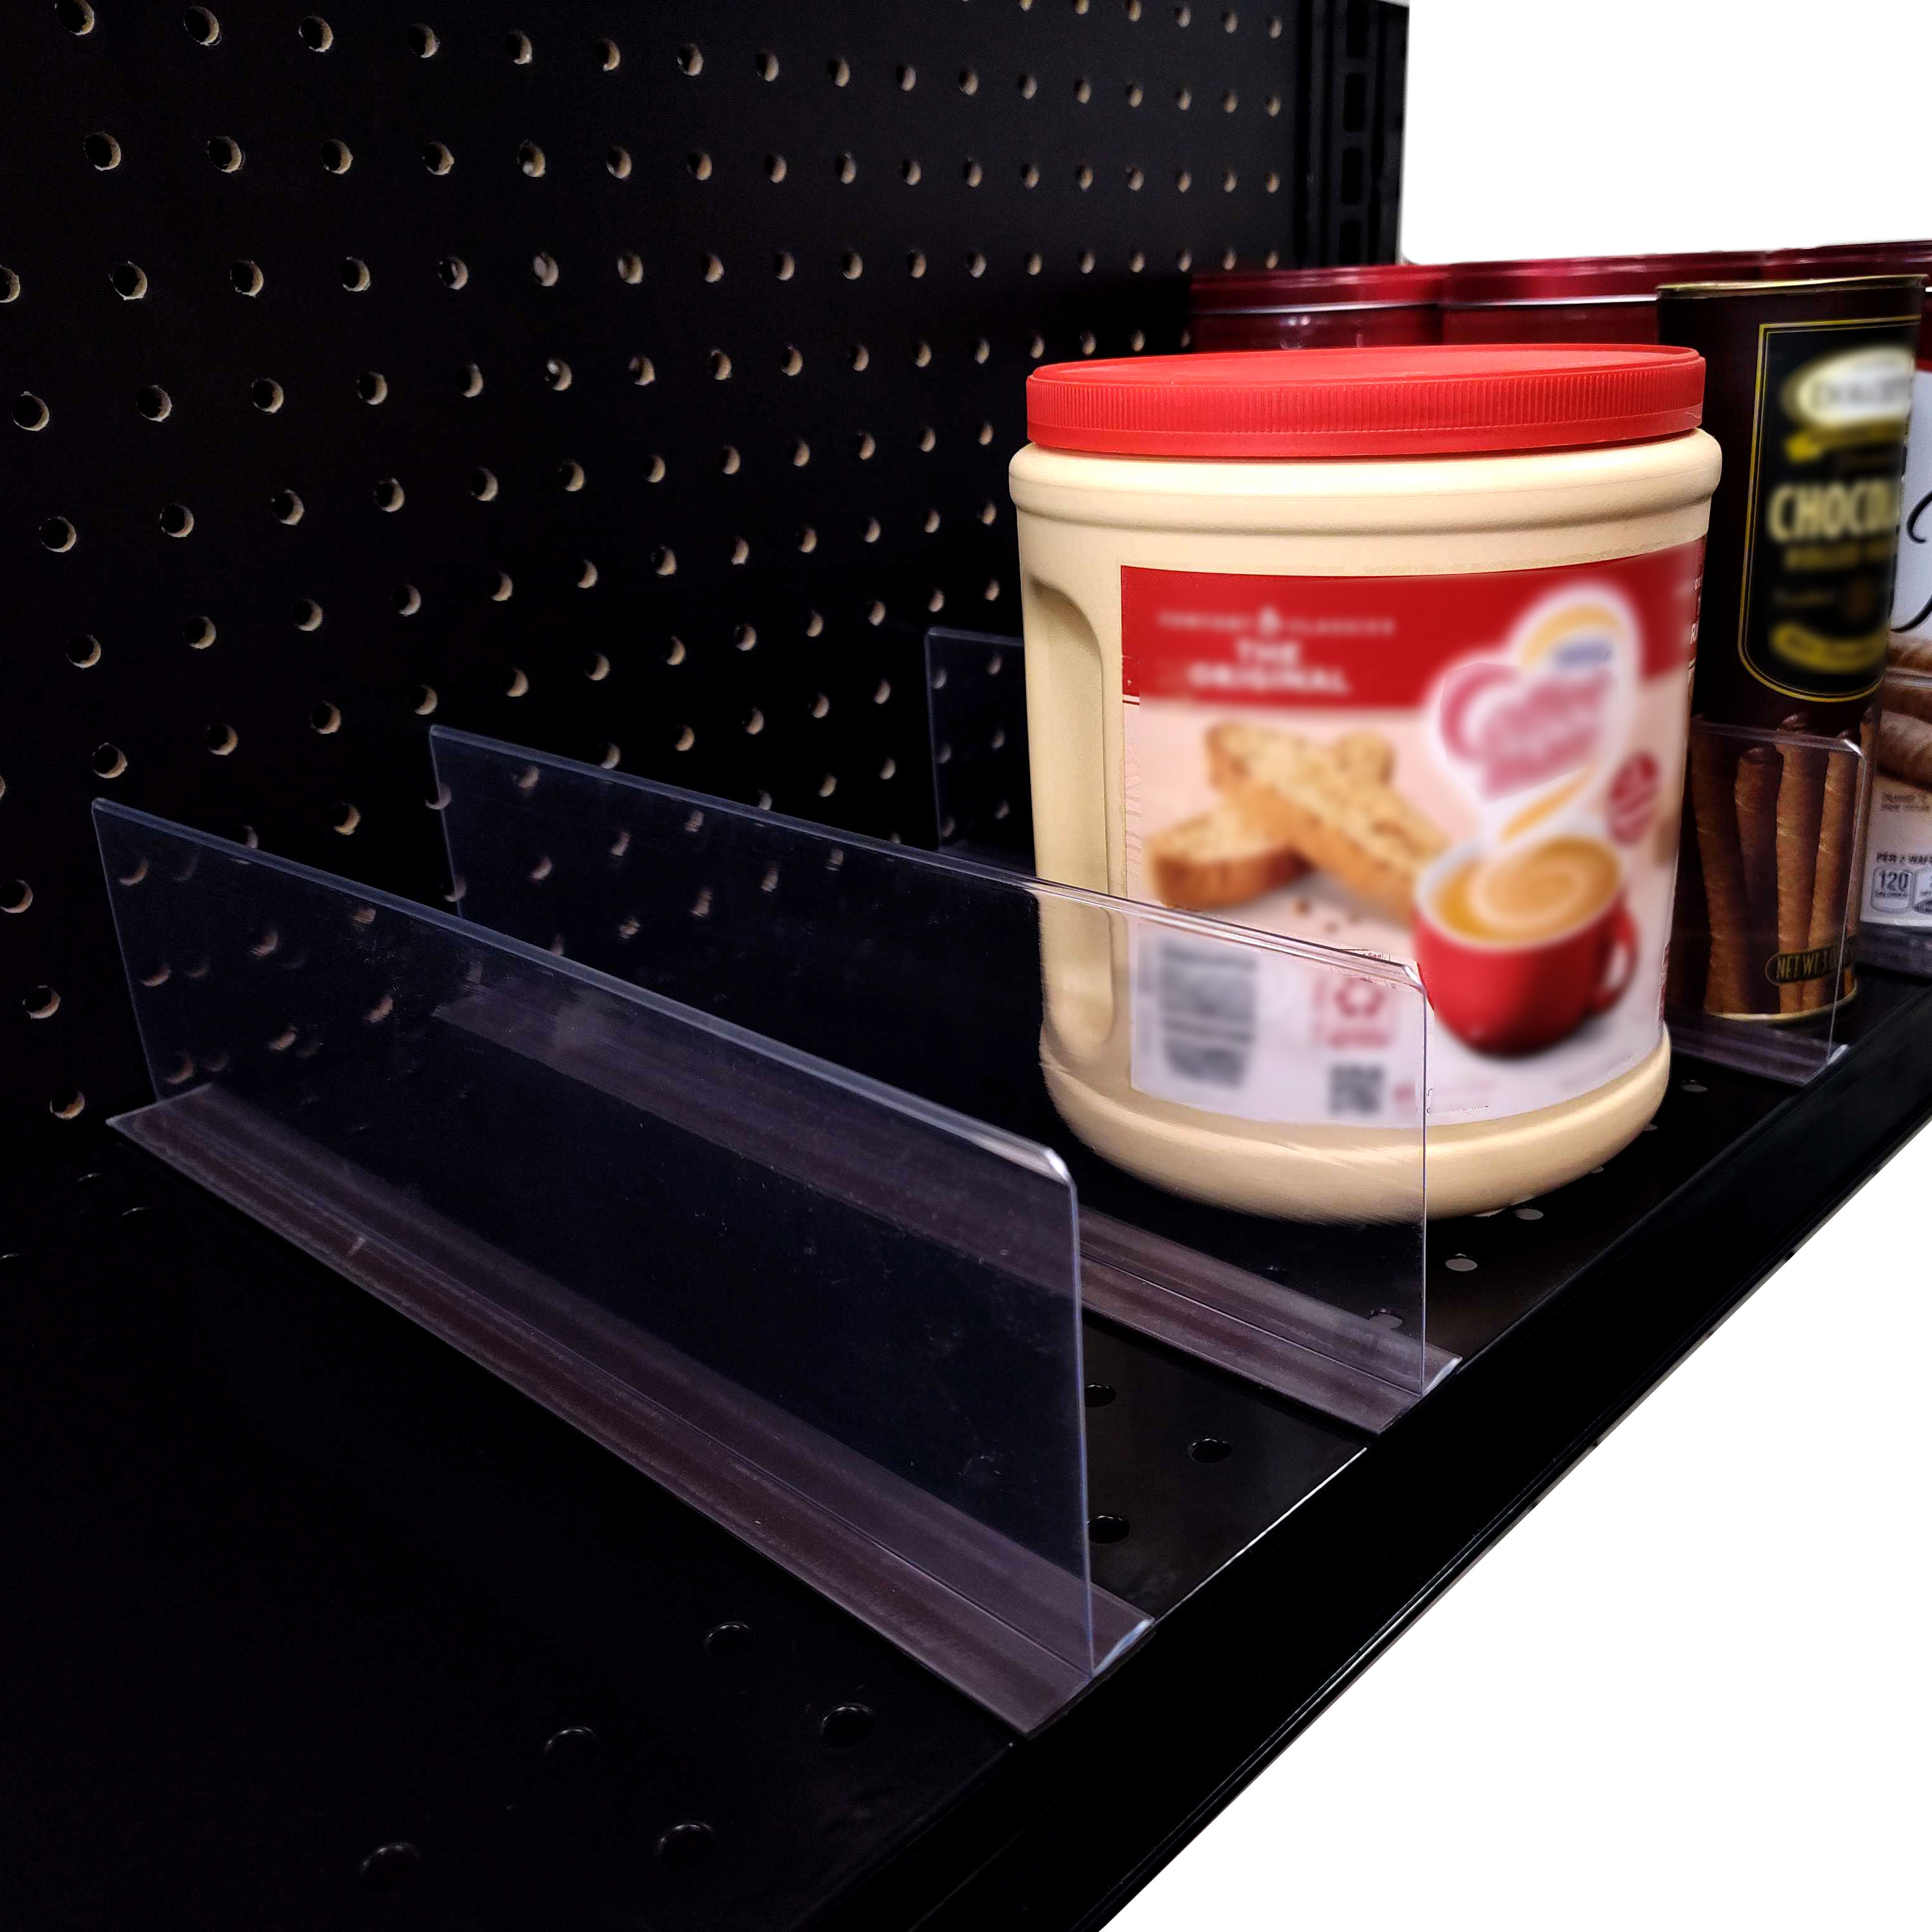 Clear Plastic Shelf Dividers with Magnetic Tape - 12L x 1 3/4W x 3H